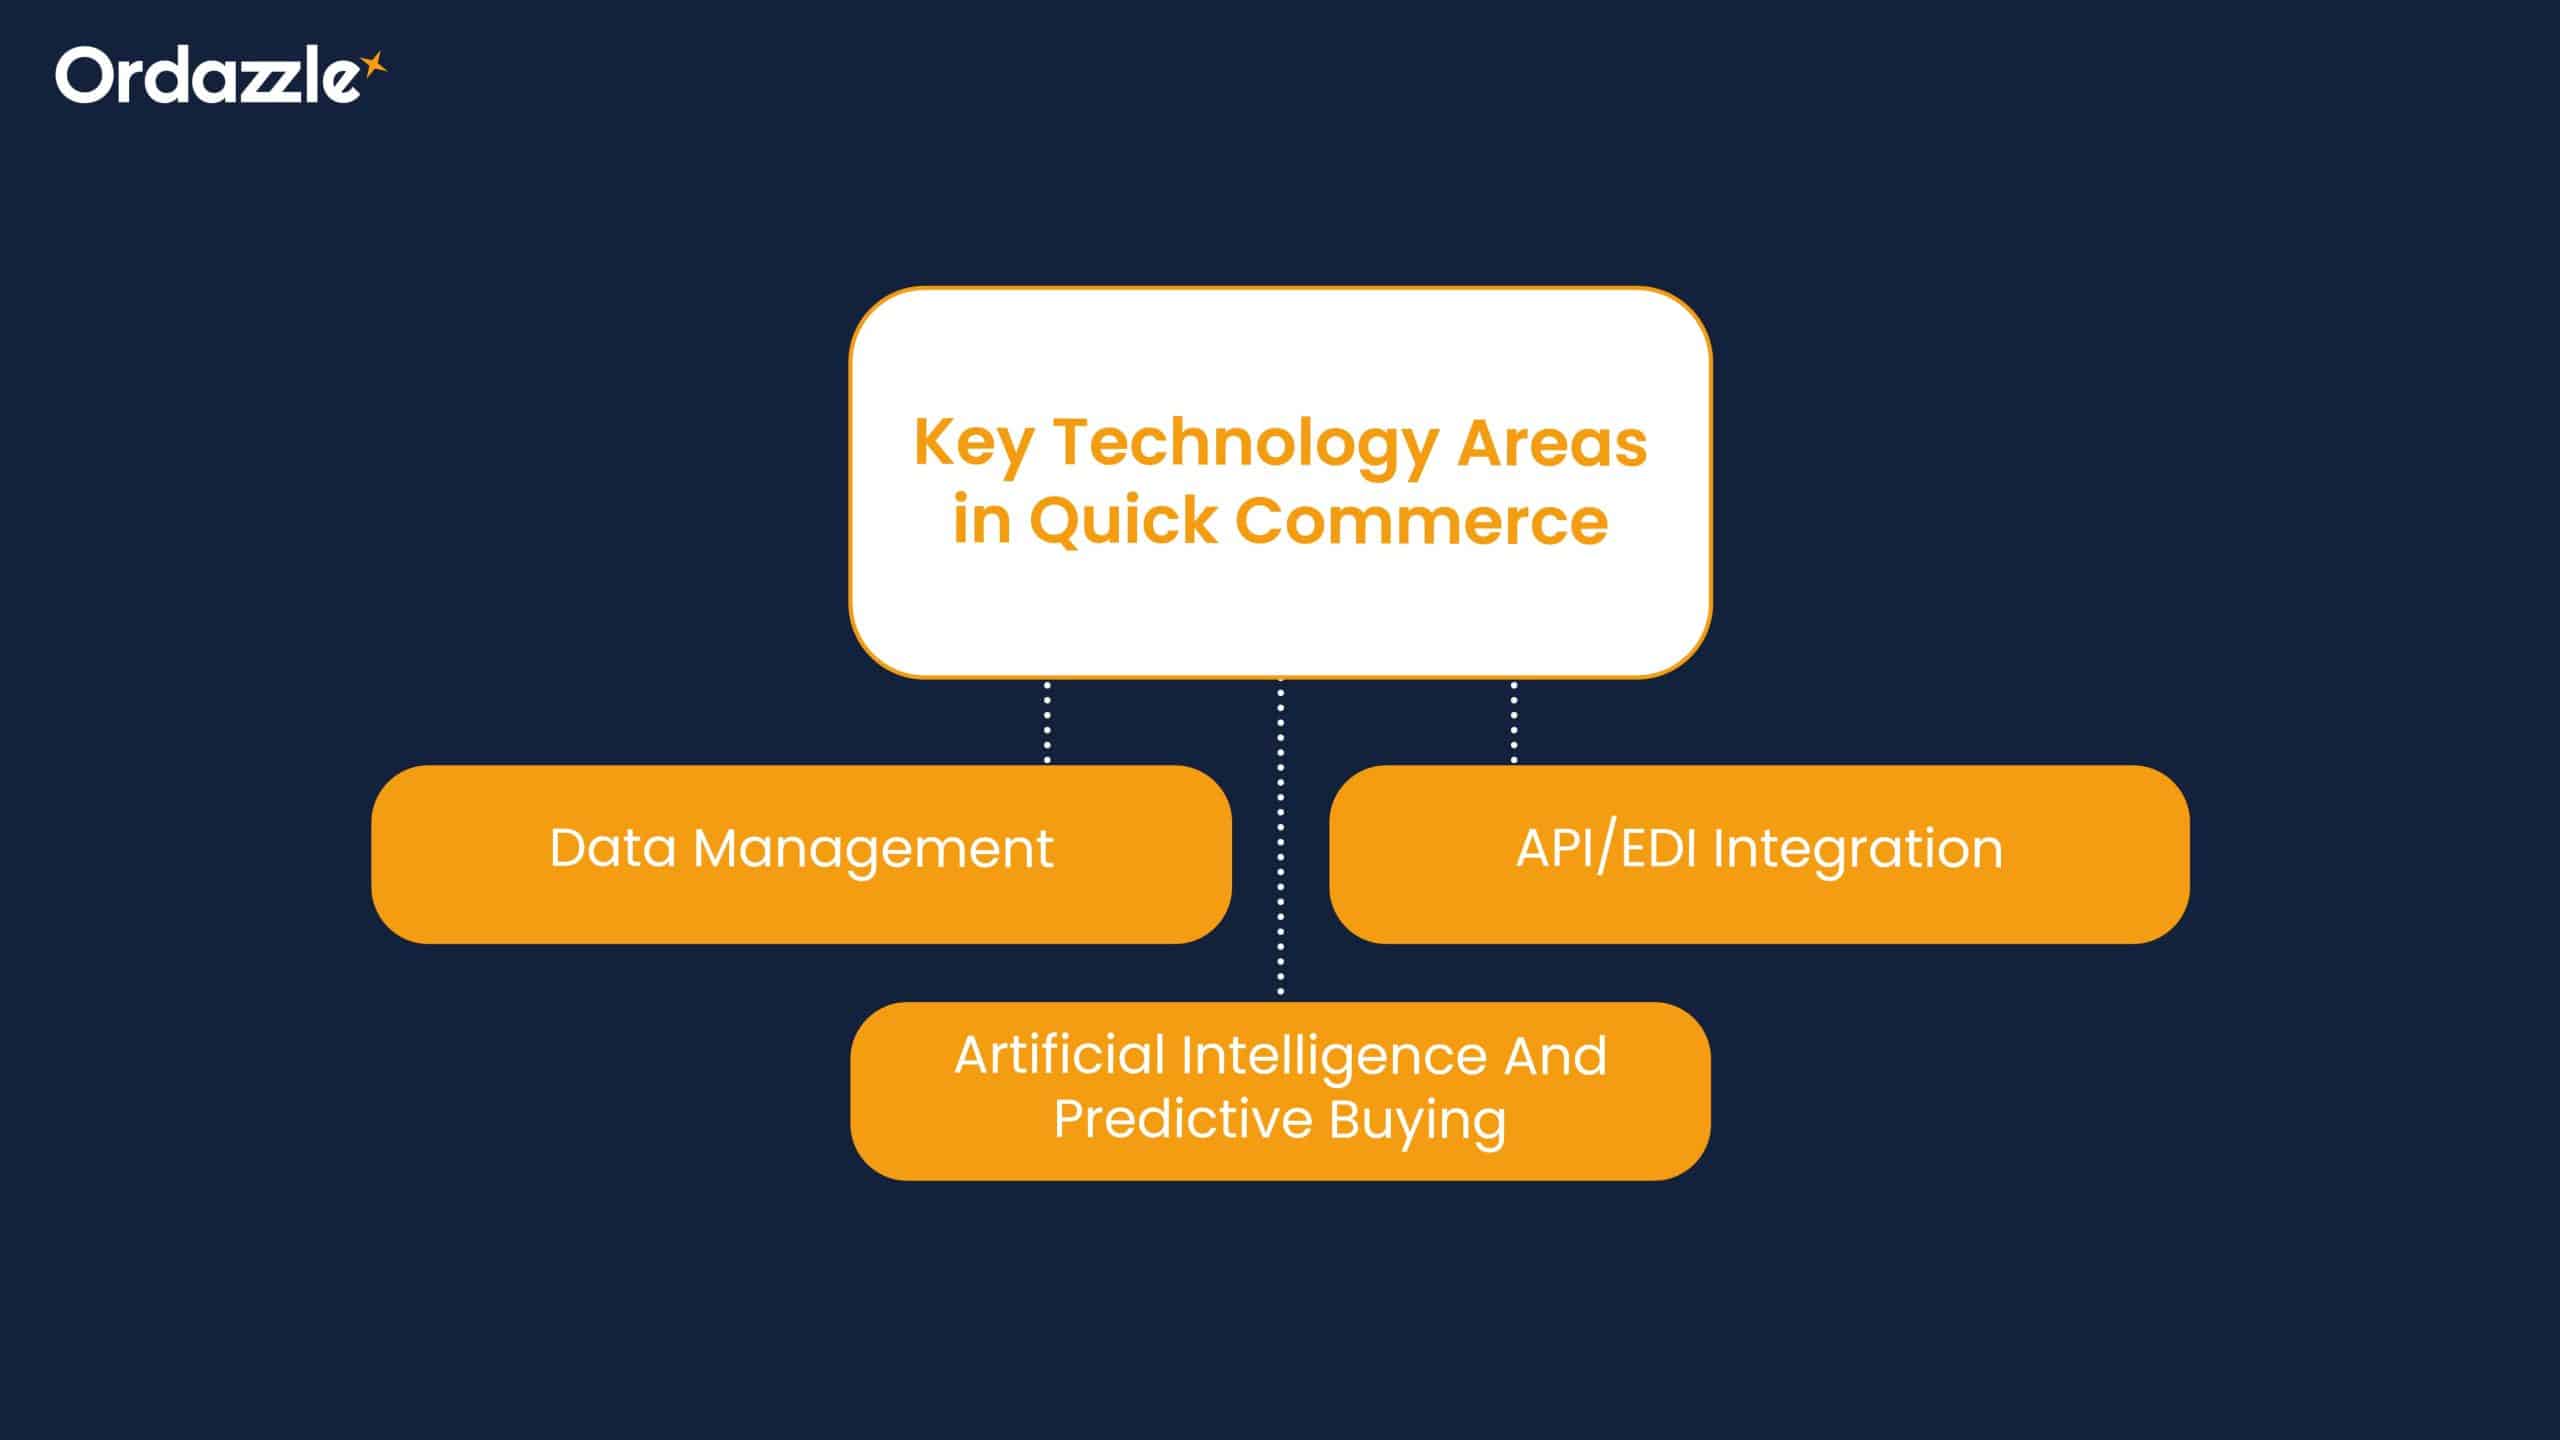 Key Technology Areas in Quick Commerce